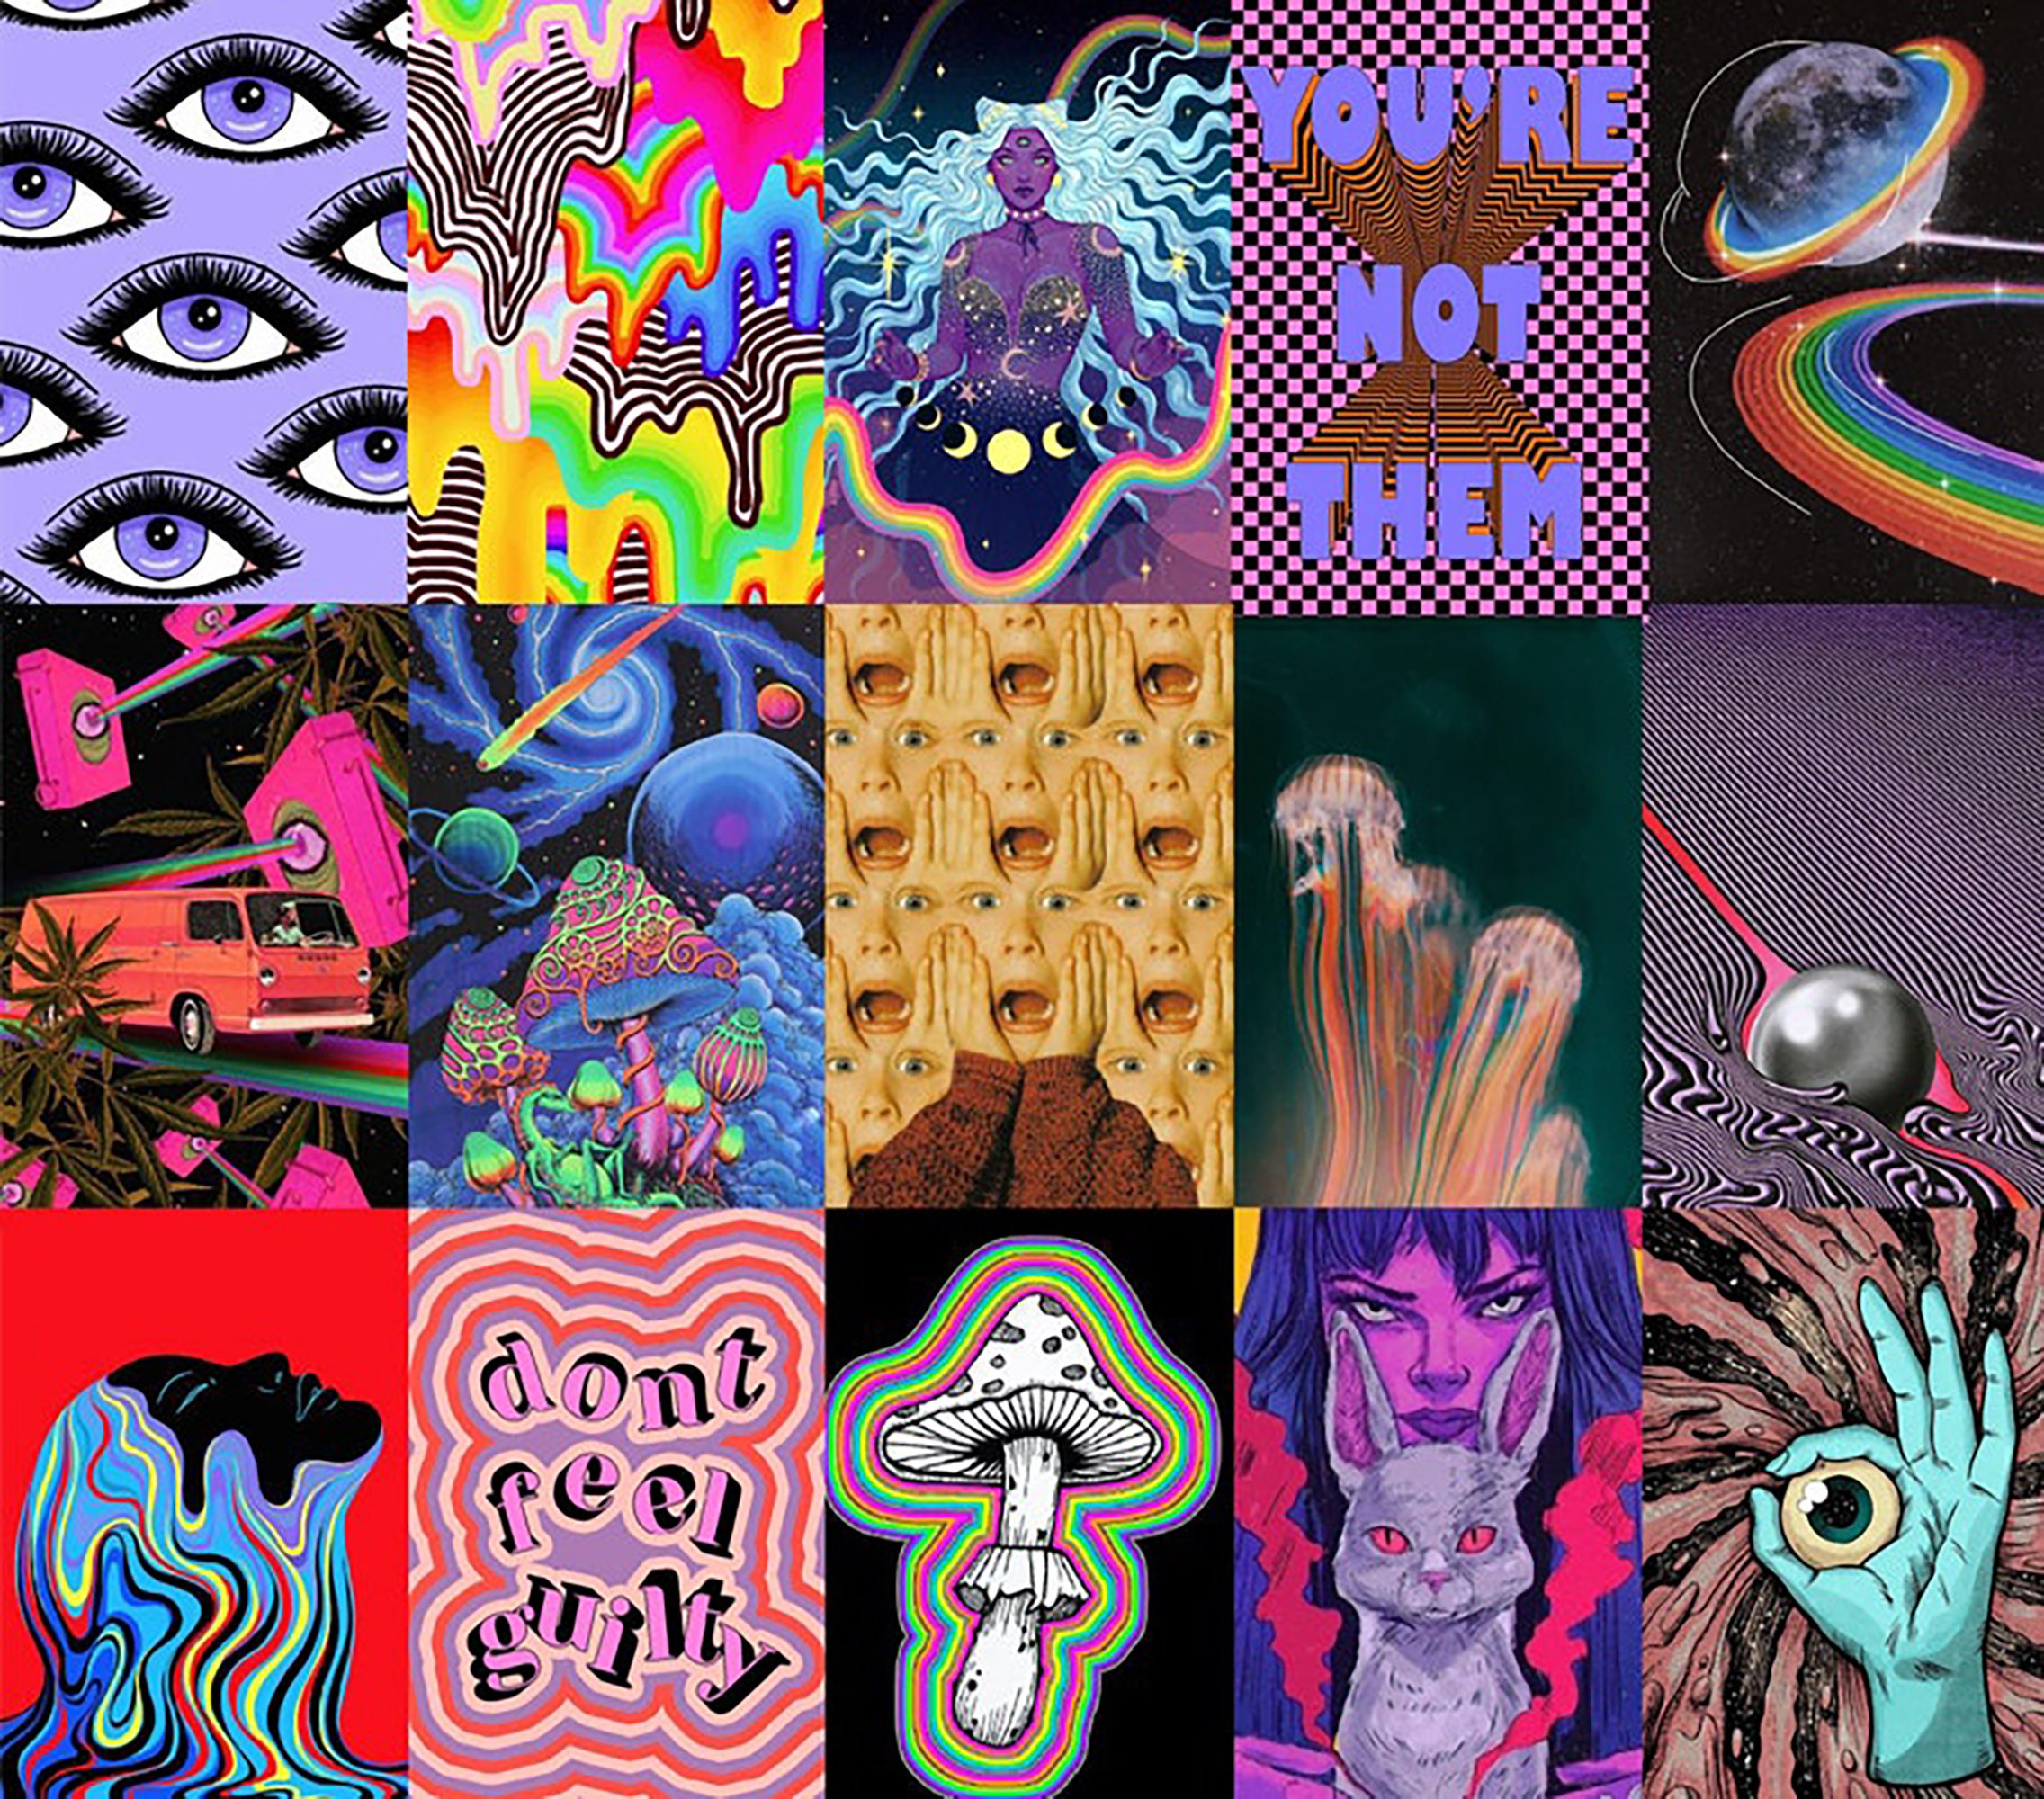 PRINTED Psychedelic Trippy Wall Collage Kit Indie Aesthetic - Etsy